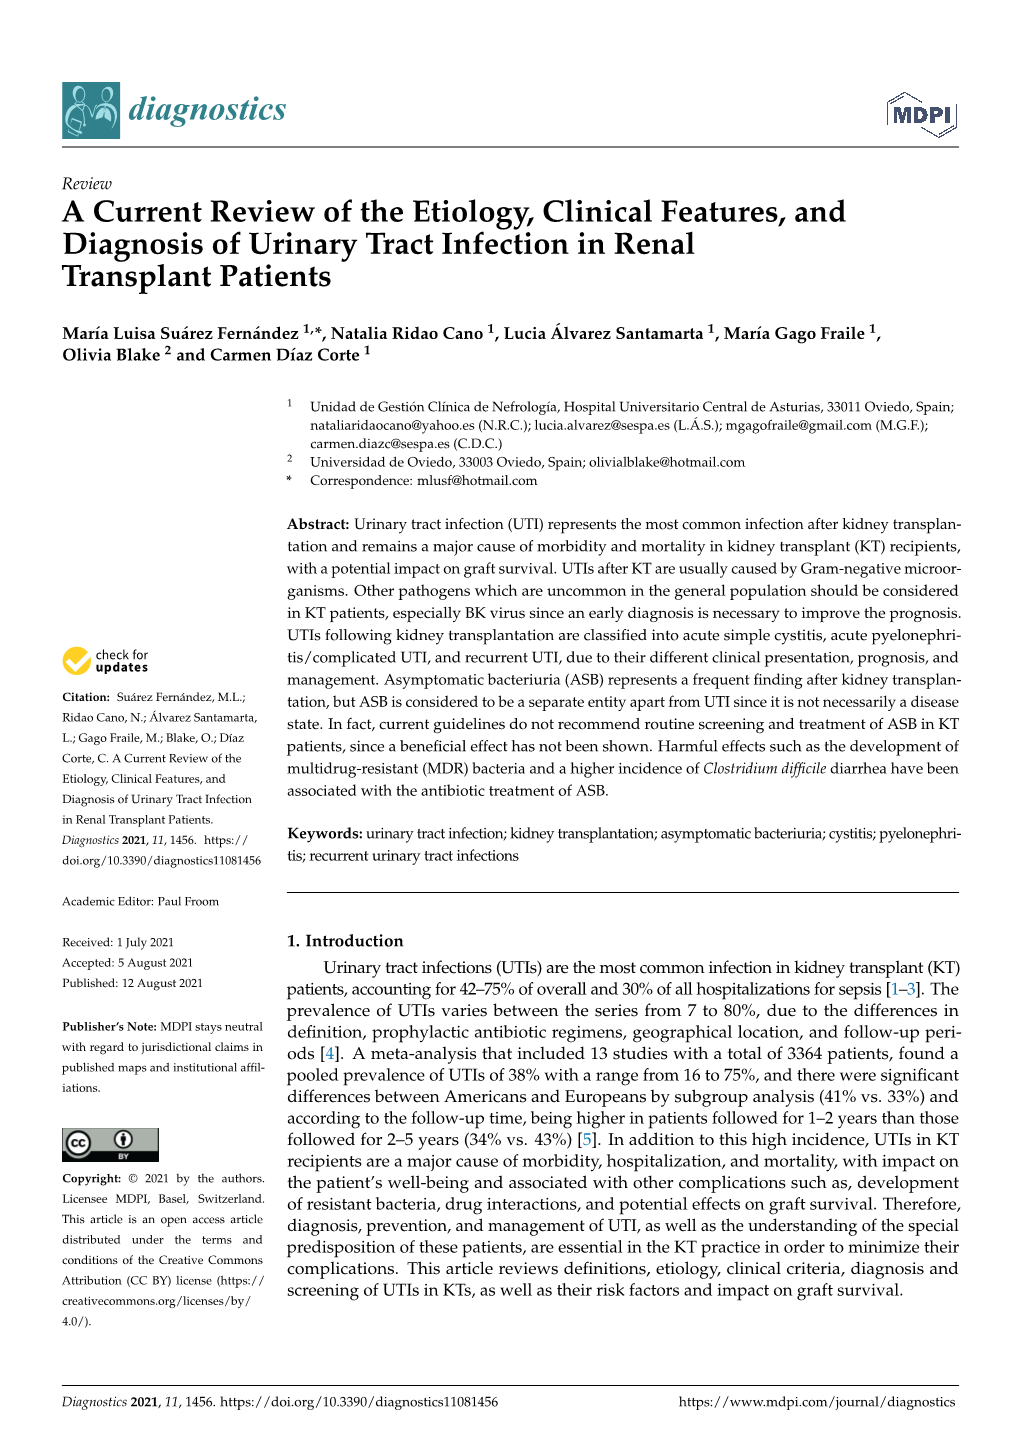 A Current Review of the Etiology, Clinical Features, and Diagnosis of Urinary Tract Infection in Renal Transplant Patients